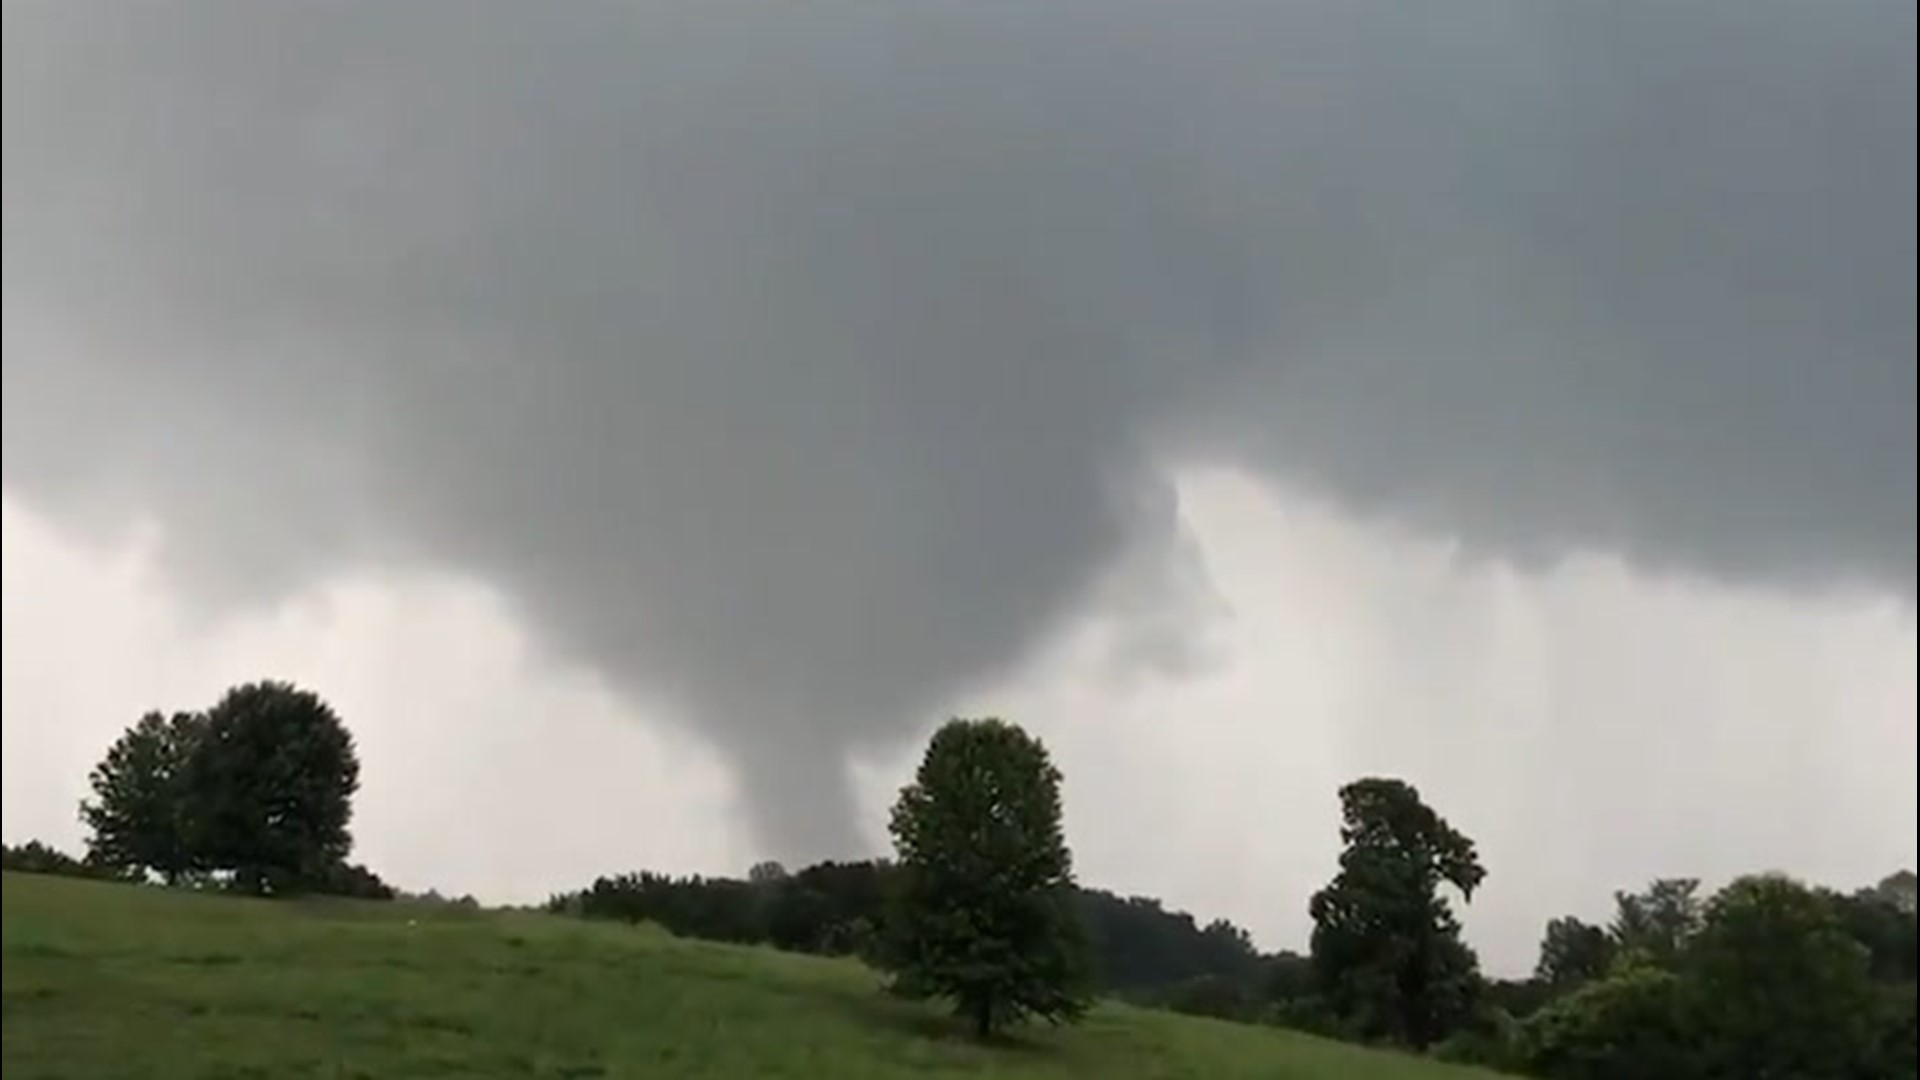 This funnel cloud formed over Botetourt County, Virginia, on Aug. 1. The area was under a tornado warning.